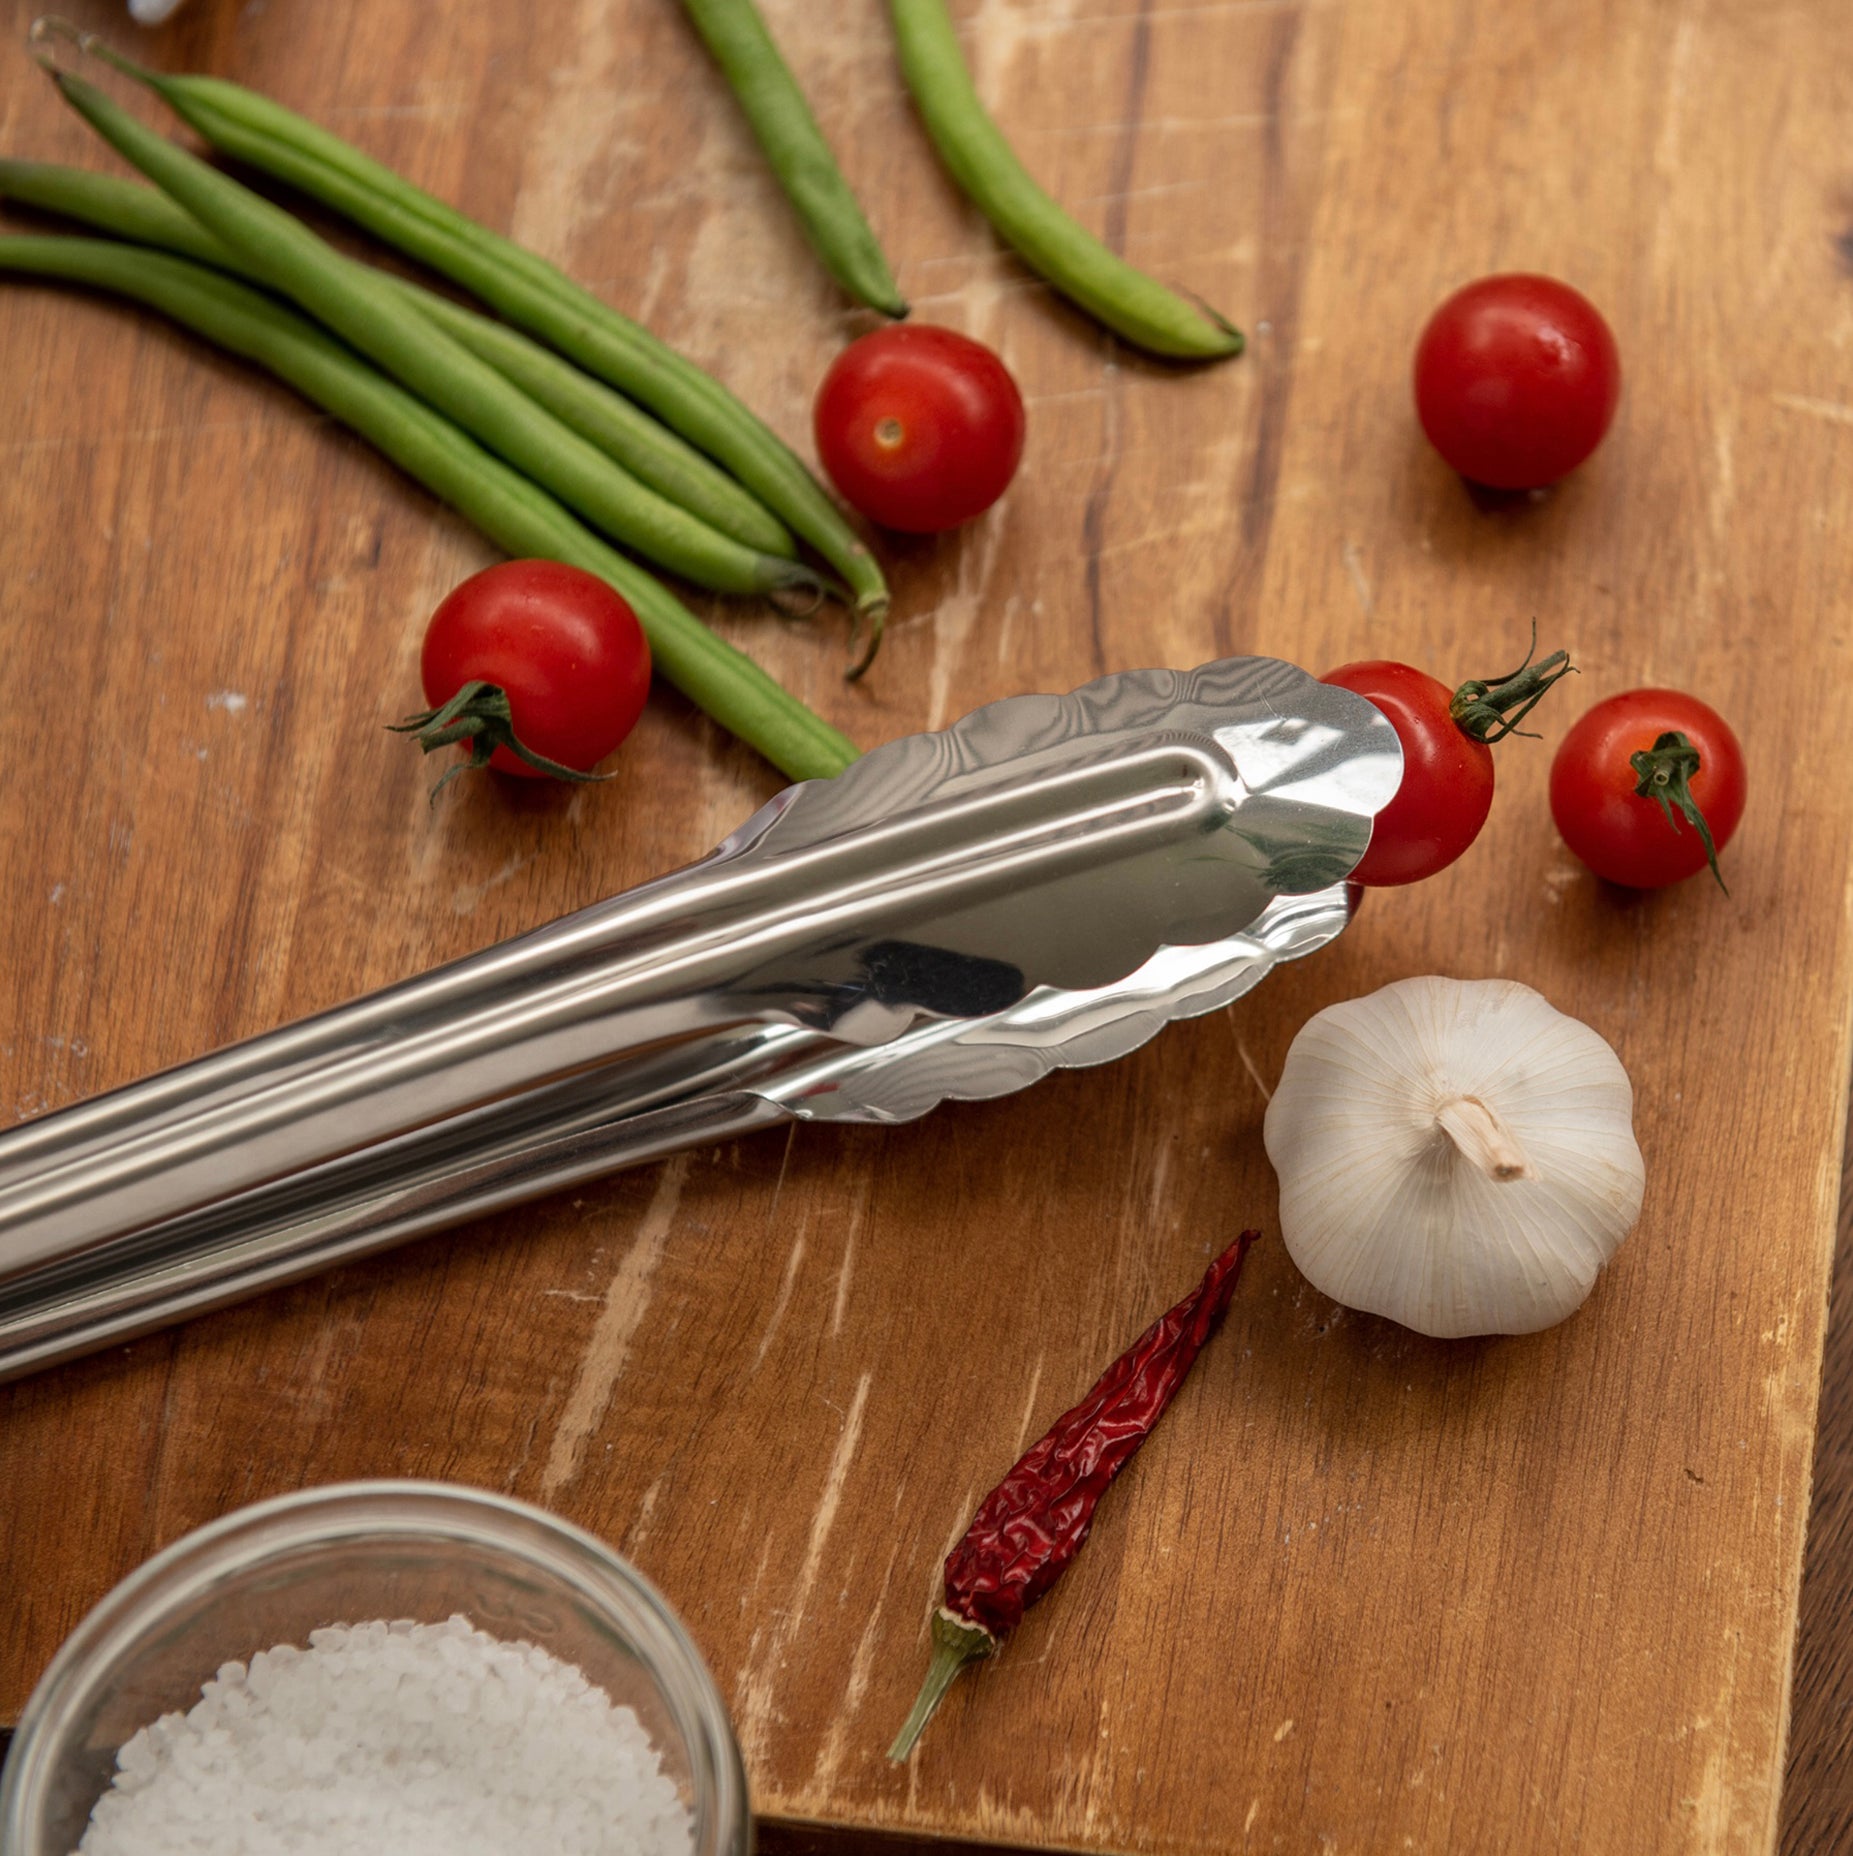 Stainless Steel Cooking Tongs - 30 cm